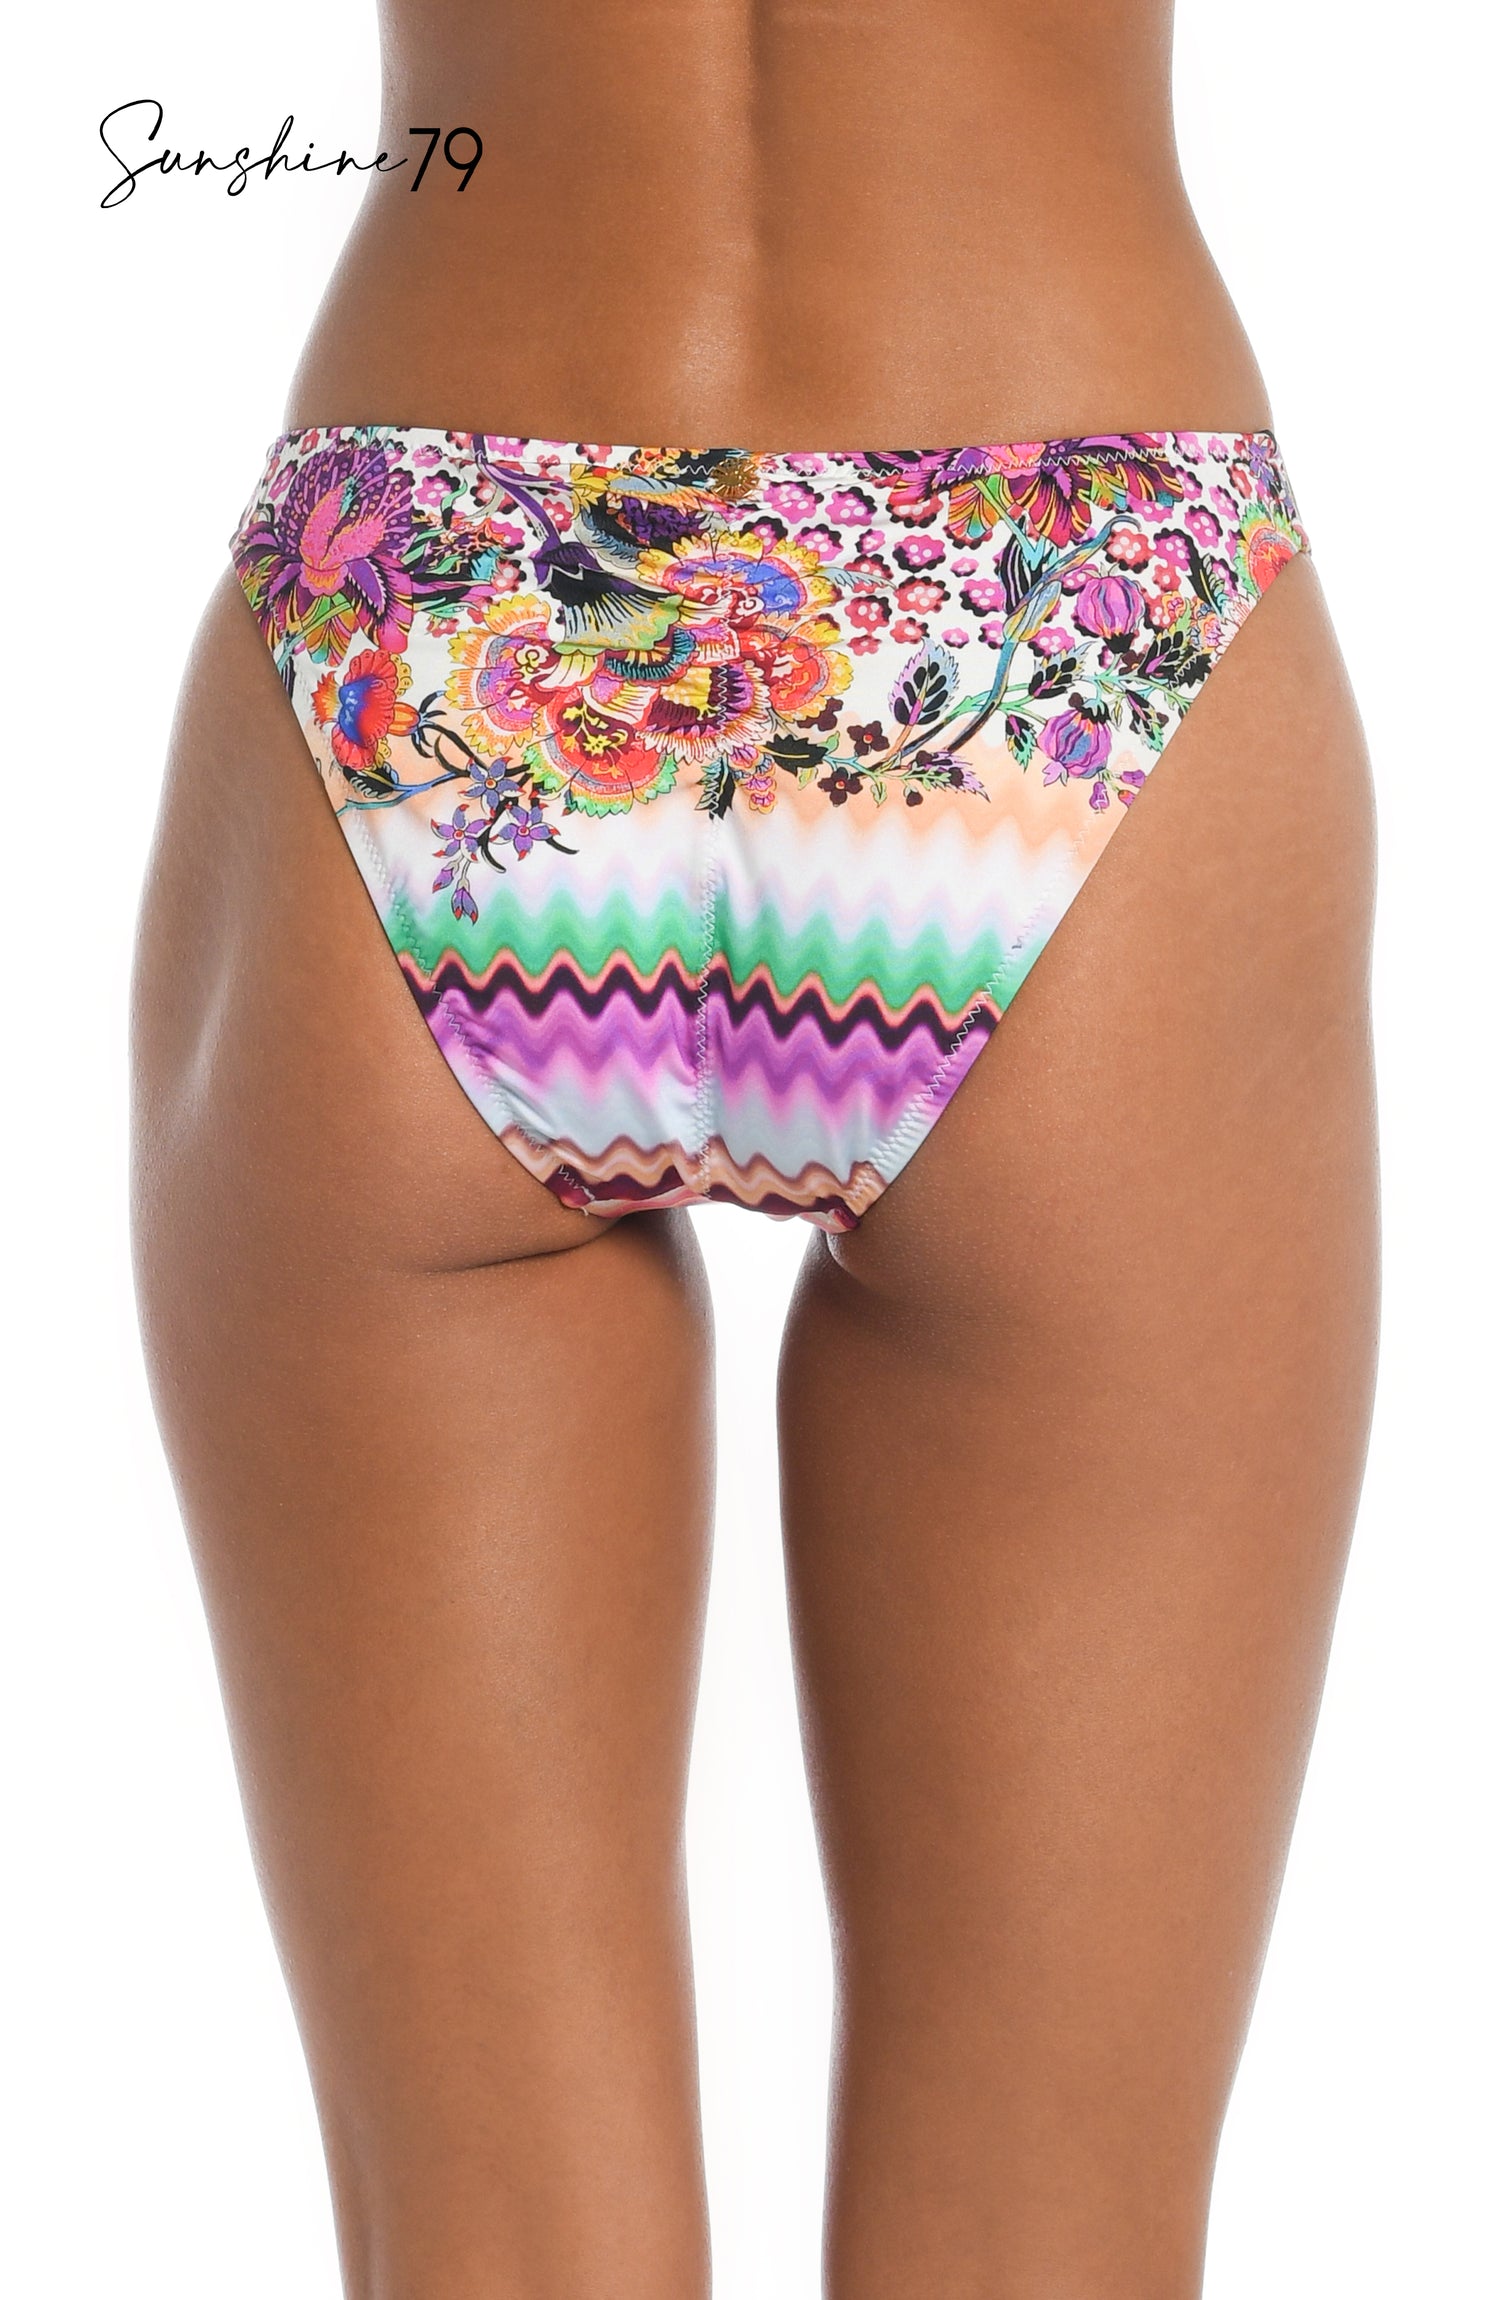 Model is wearing a pink multicolored floral and striped printed french cut bikini bottom from our Sunshine 79 brand.